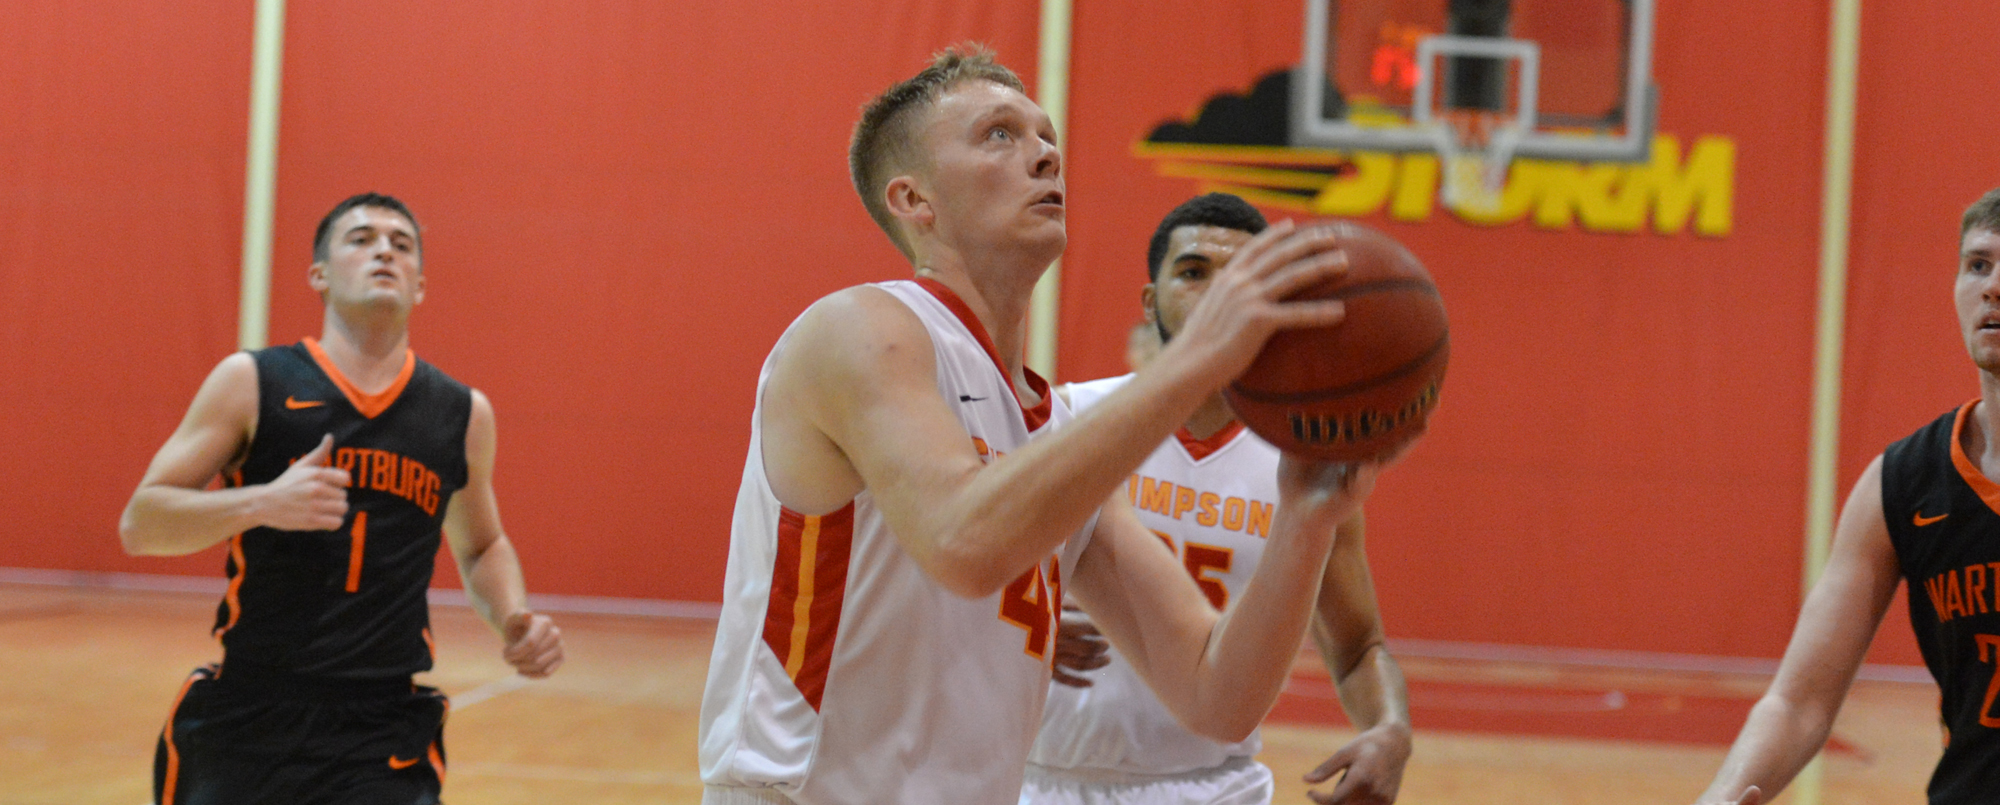 Sam Amsbaugh scored 19 points in Simpson's 73-65 loss to Loras on Saturday.